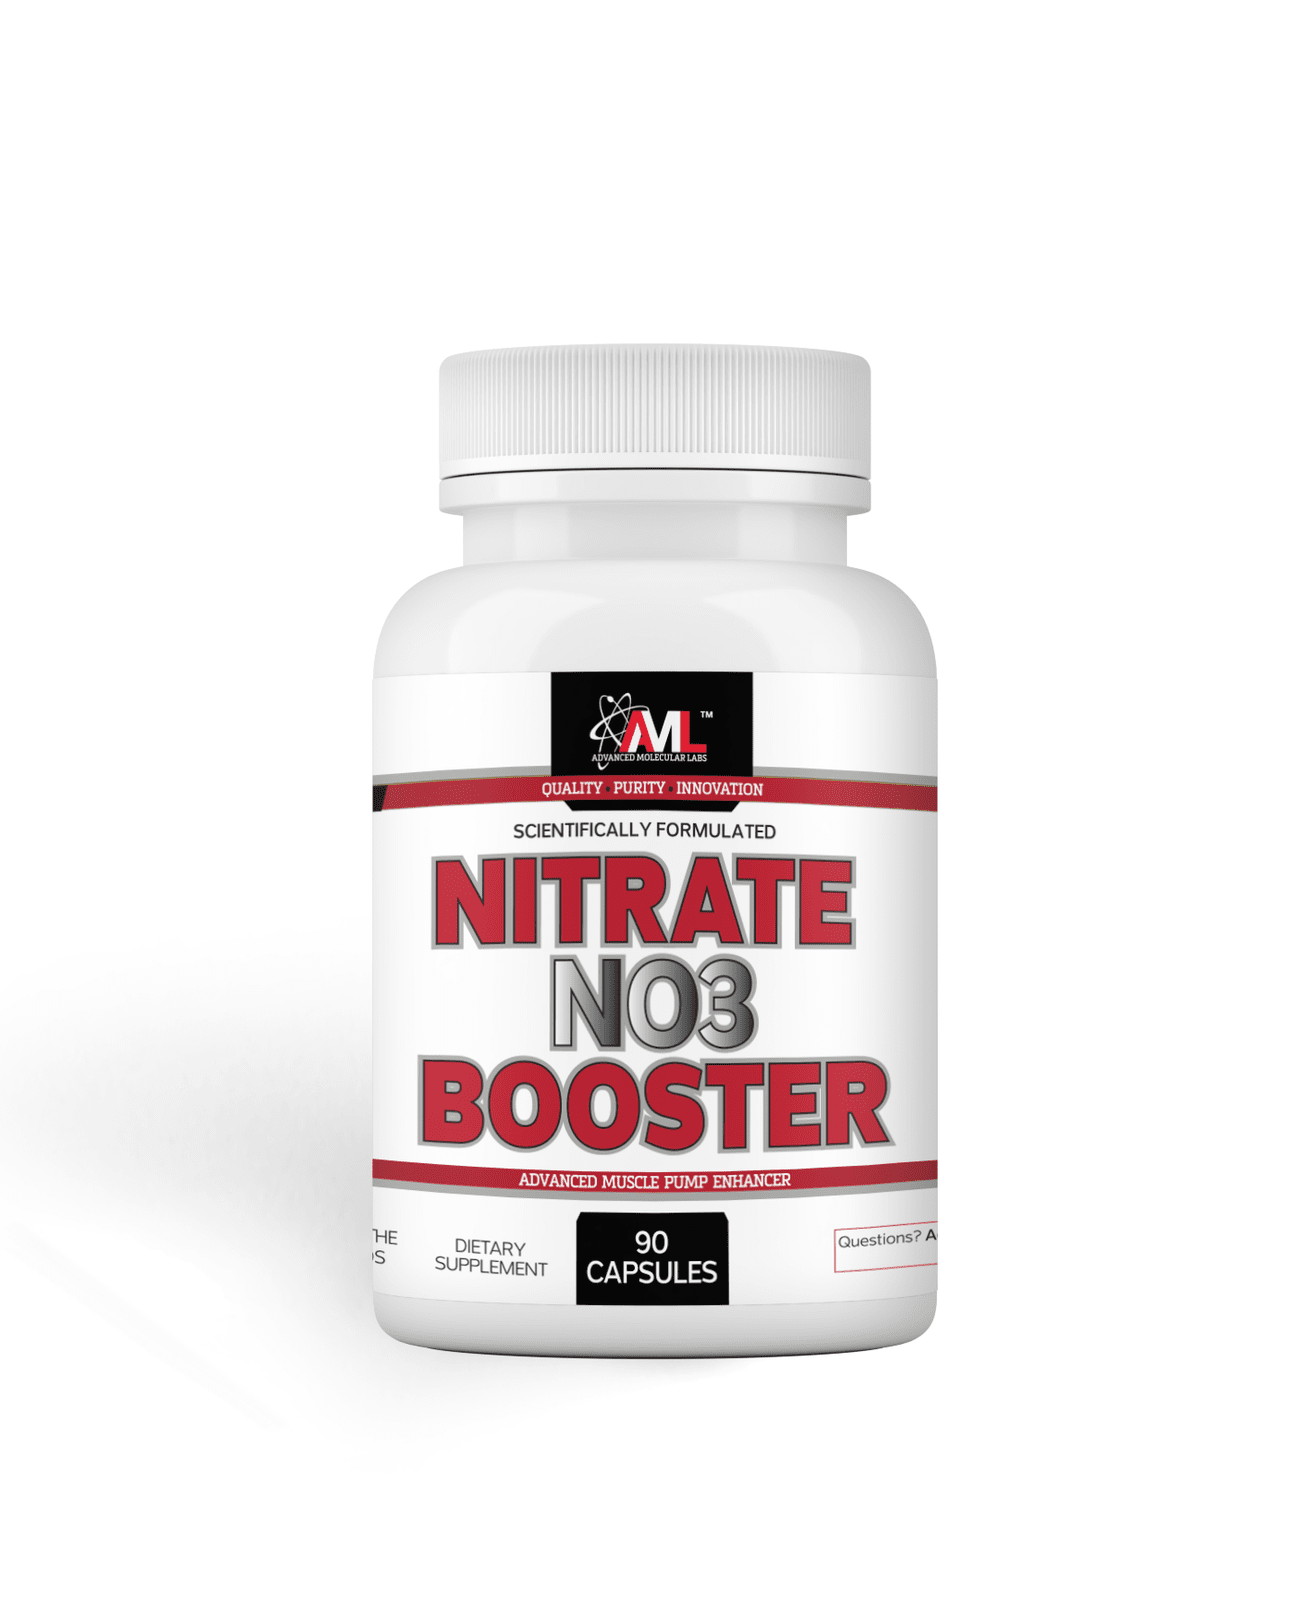 AML NITRATE NO3 BOOSTER